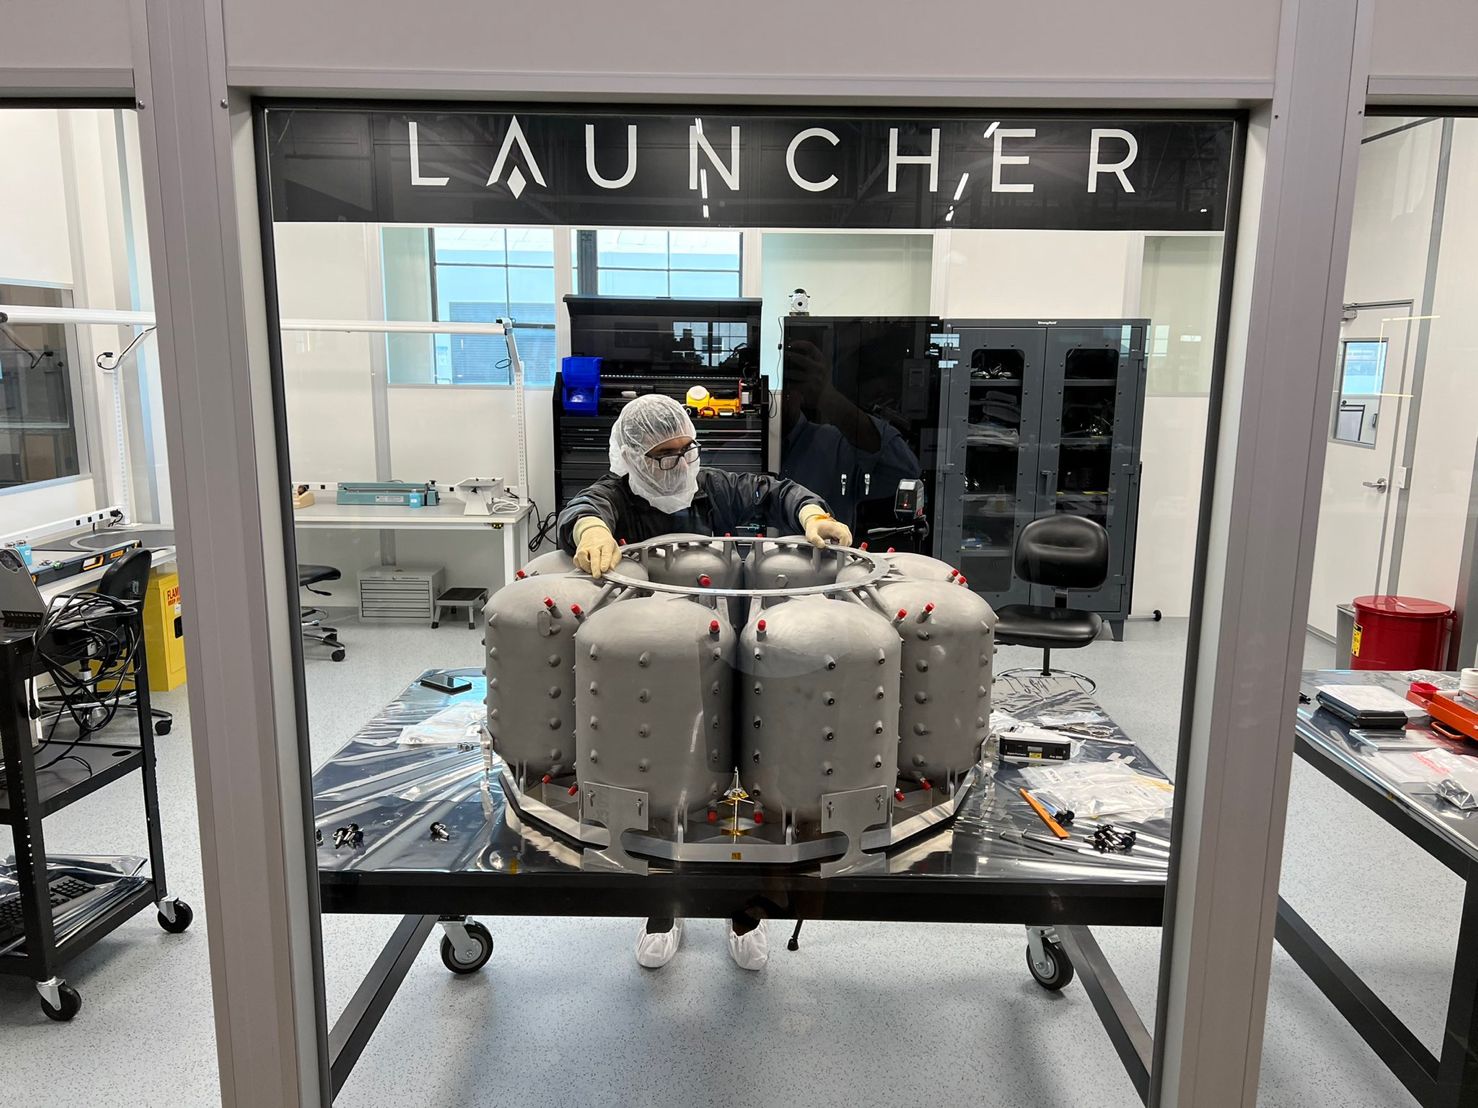 Launcher's Orbiter SN1 integration has started in the clean room facility.